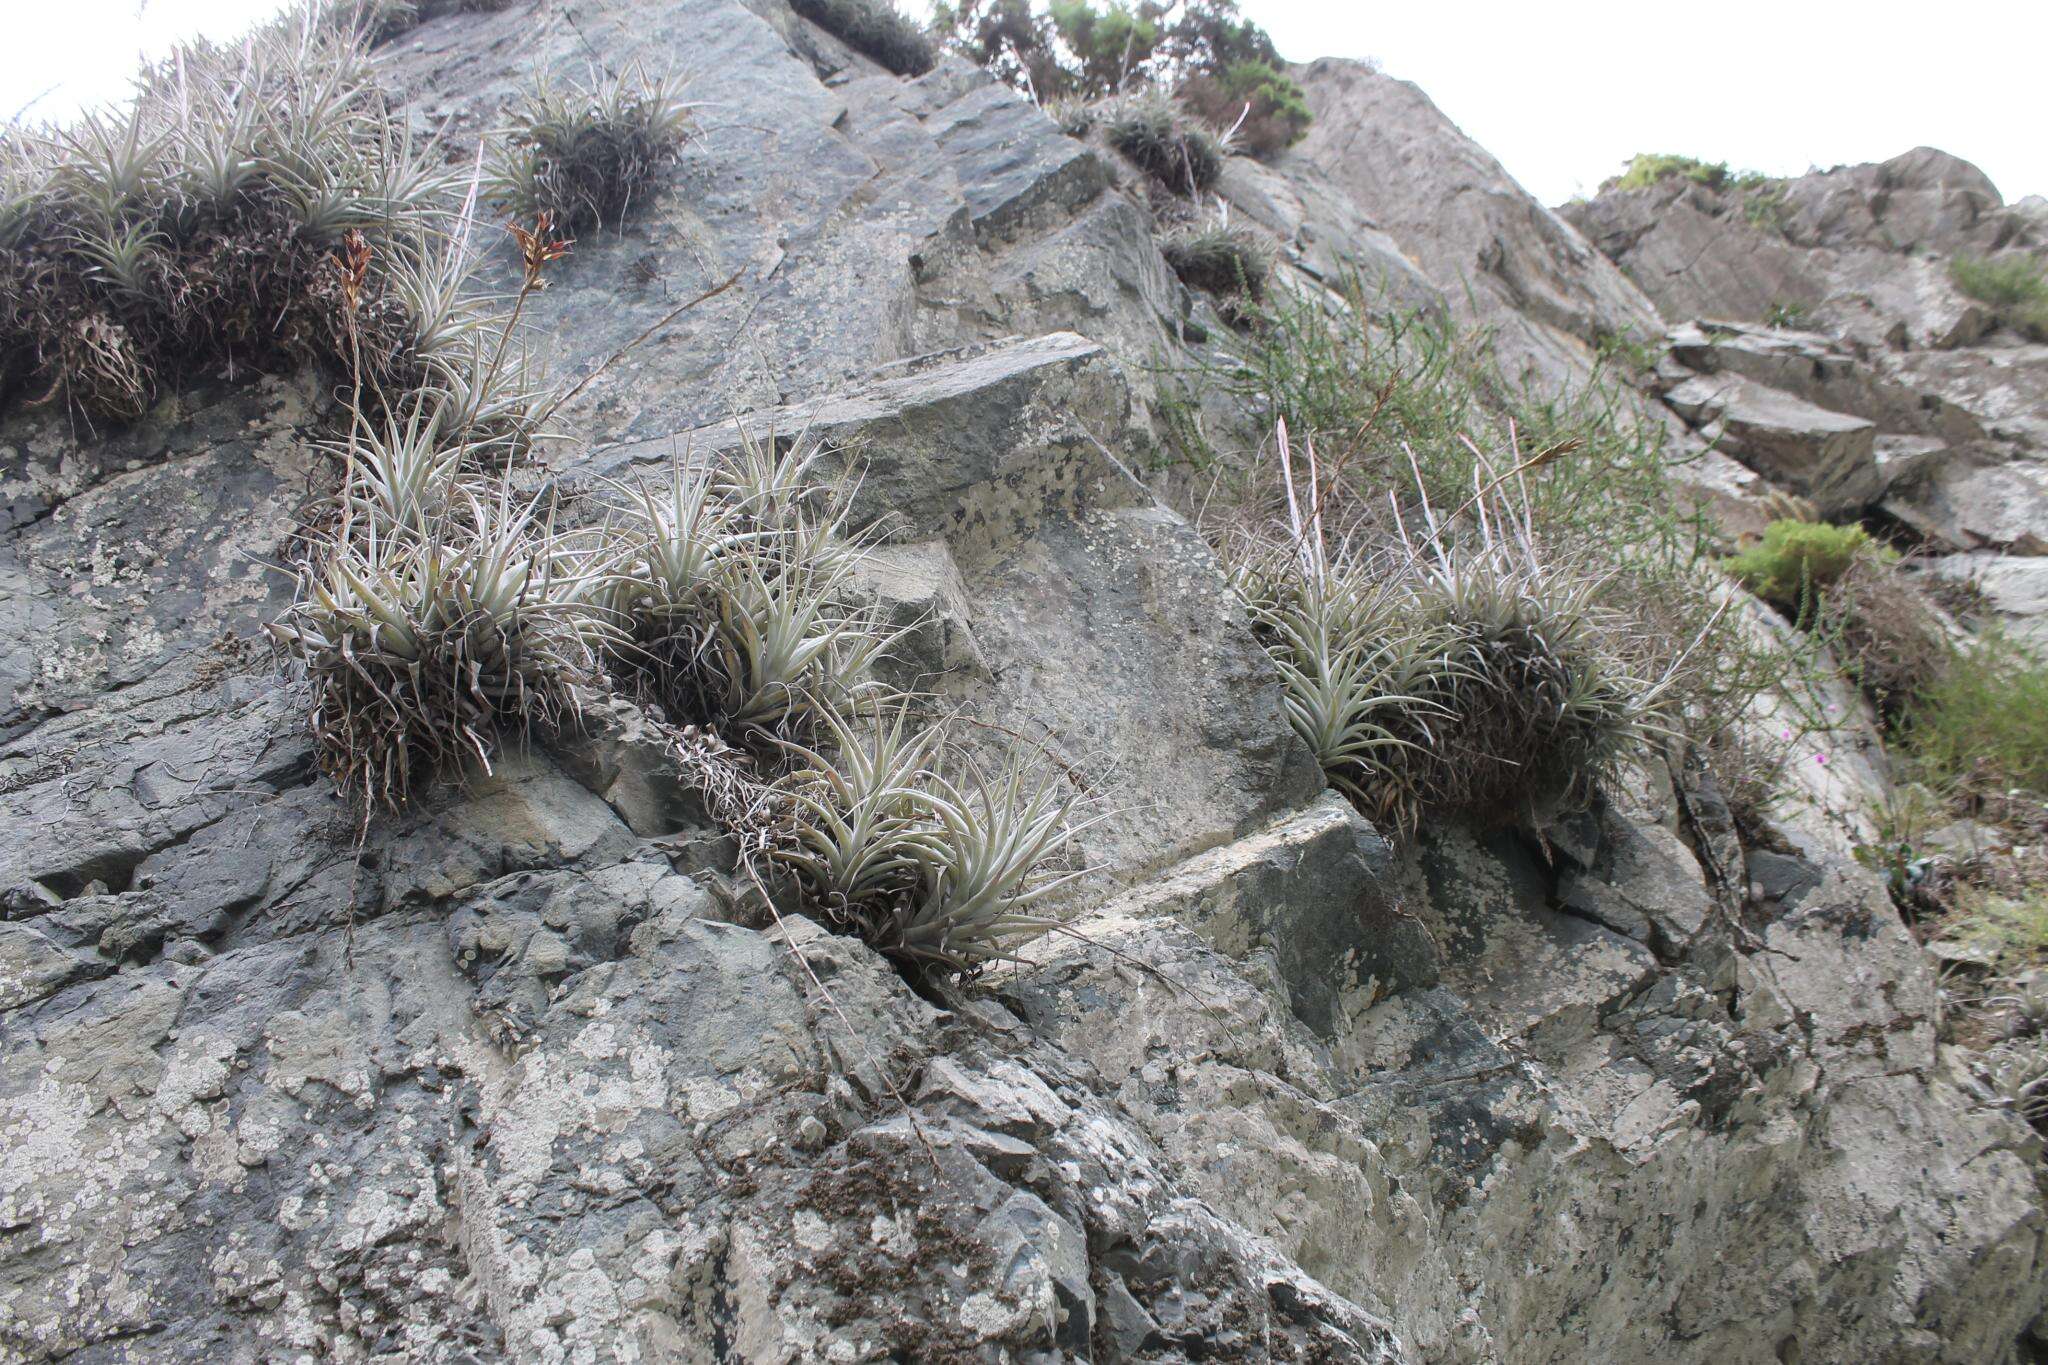 Image of Airplants